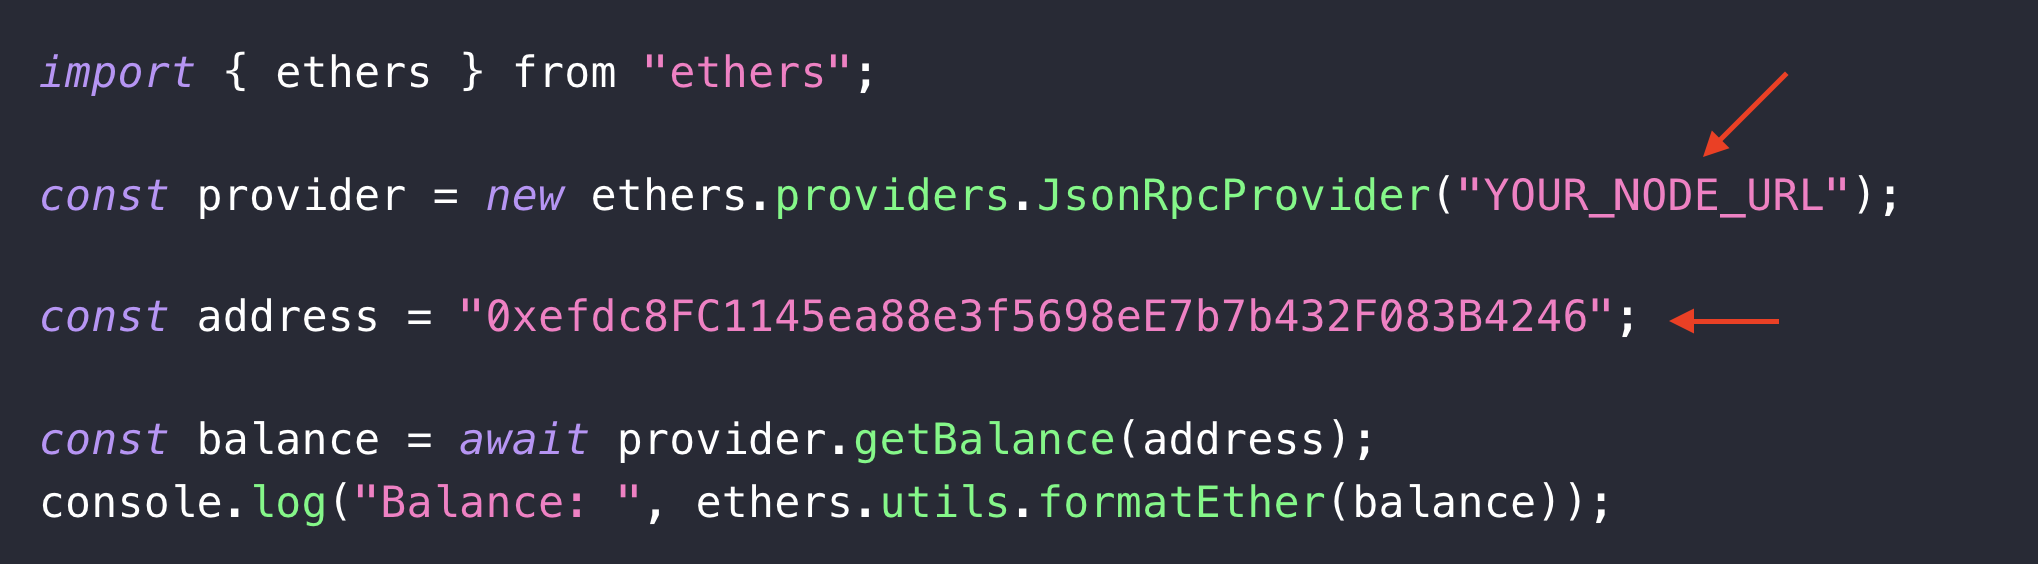 Arrows pointing at provider and address parameters for configuring Avalanche nodes code.